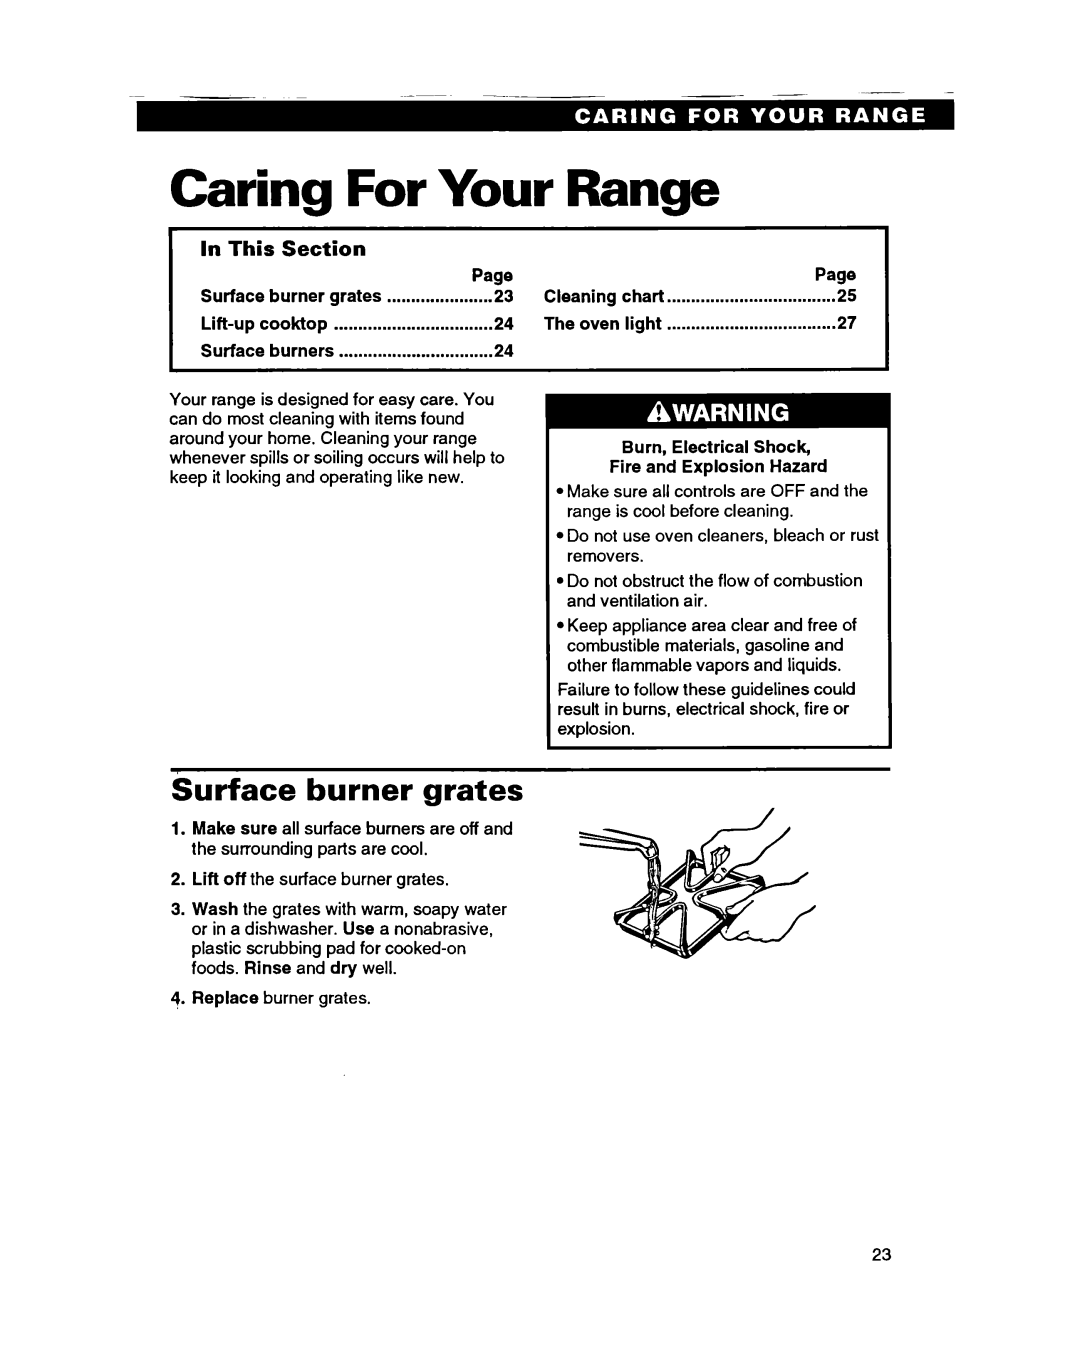 Roper FGS395B important safety instructions Caring For Your Range, Surface burner grates, In This Section 